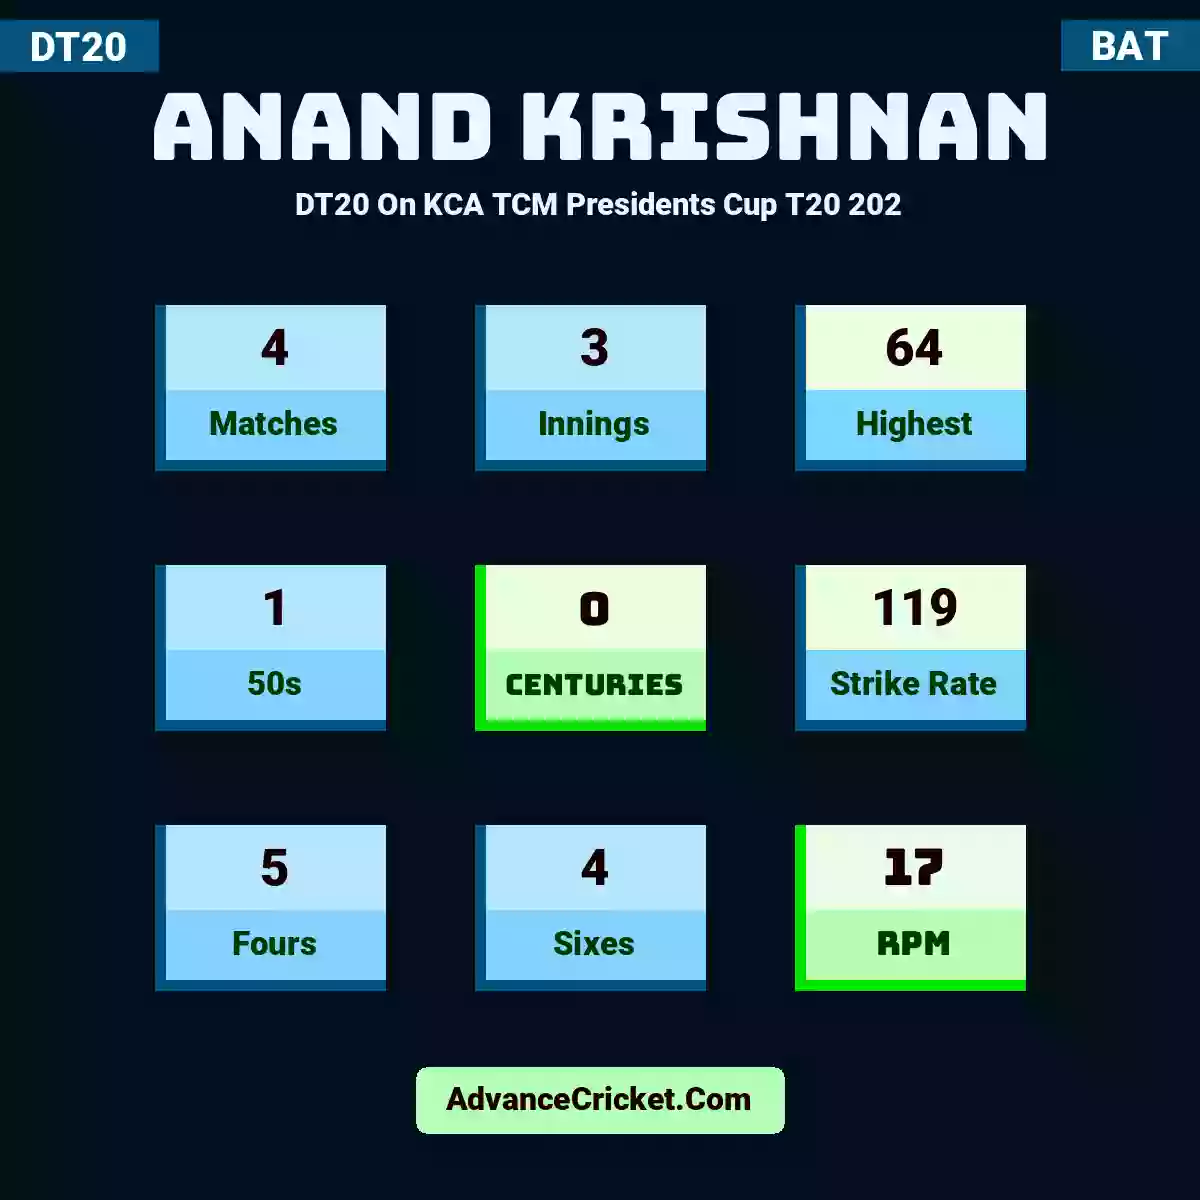 Anand Krishnan DT20  On KCA TCM Presidents Cup T20 202, Anand Krishnan played 4 matches, scored 64 runs as highest, 1 half-centuries, and 0 centuries, with a strike rate of 119. A.Krishnan hit 5 fours and 4 sixes, with an RPM of 17.